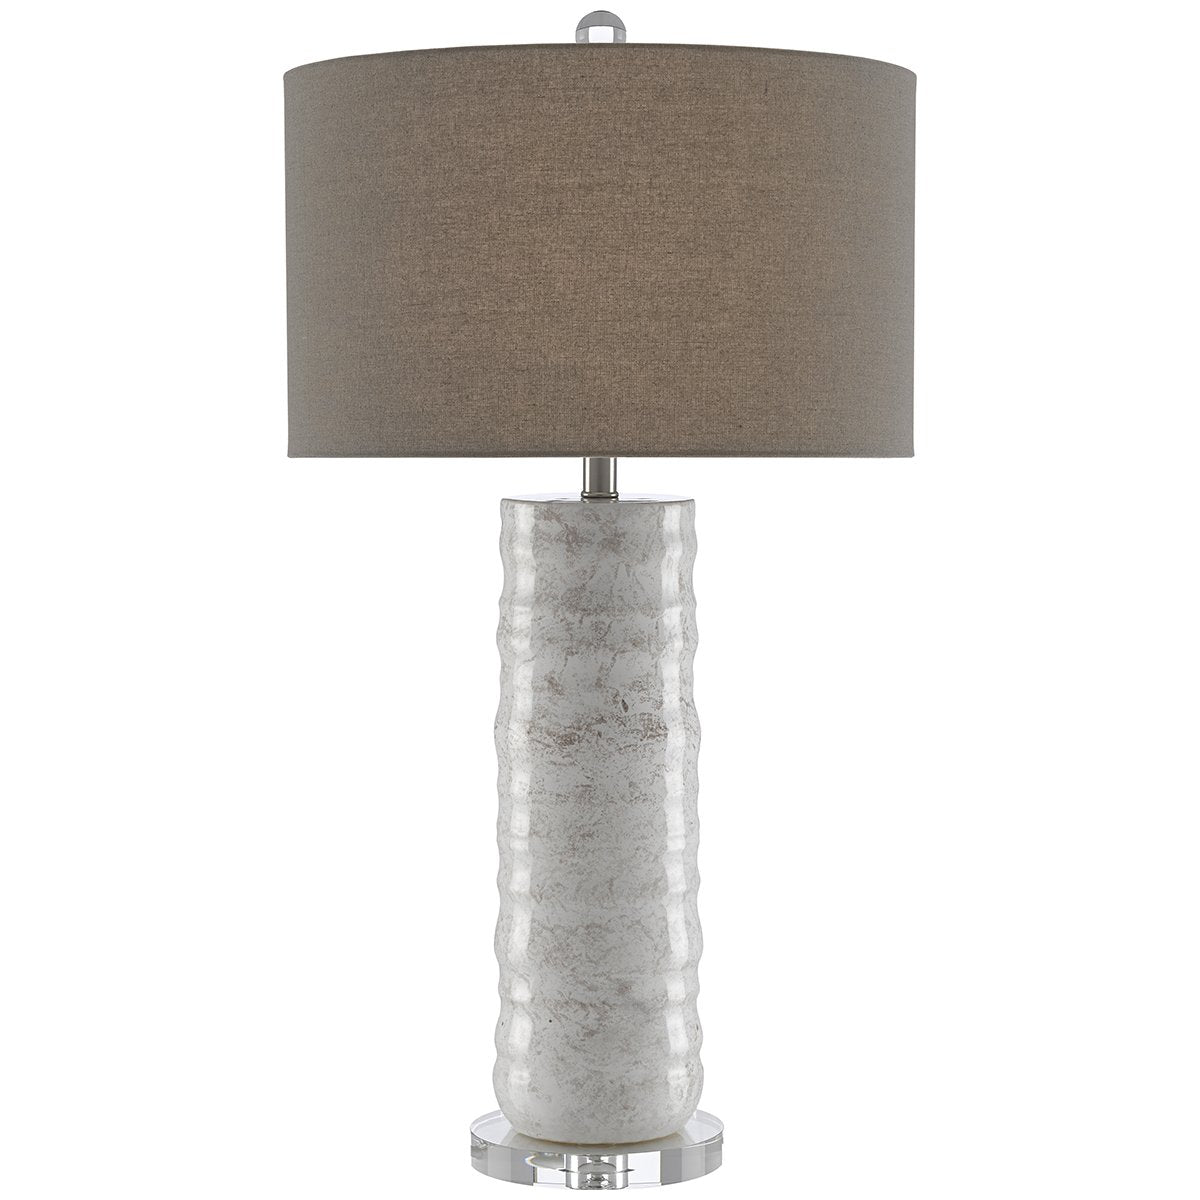 Currey and Company Pila Table Lamp